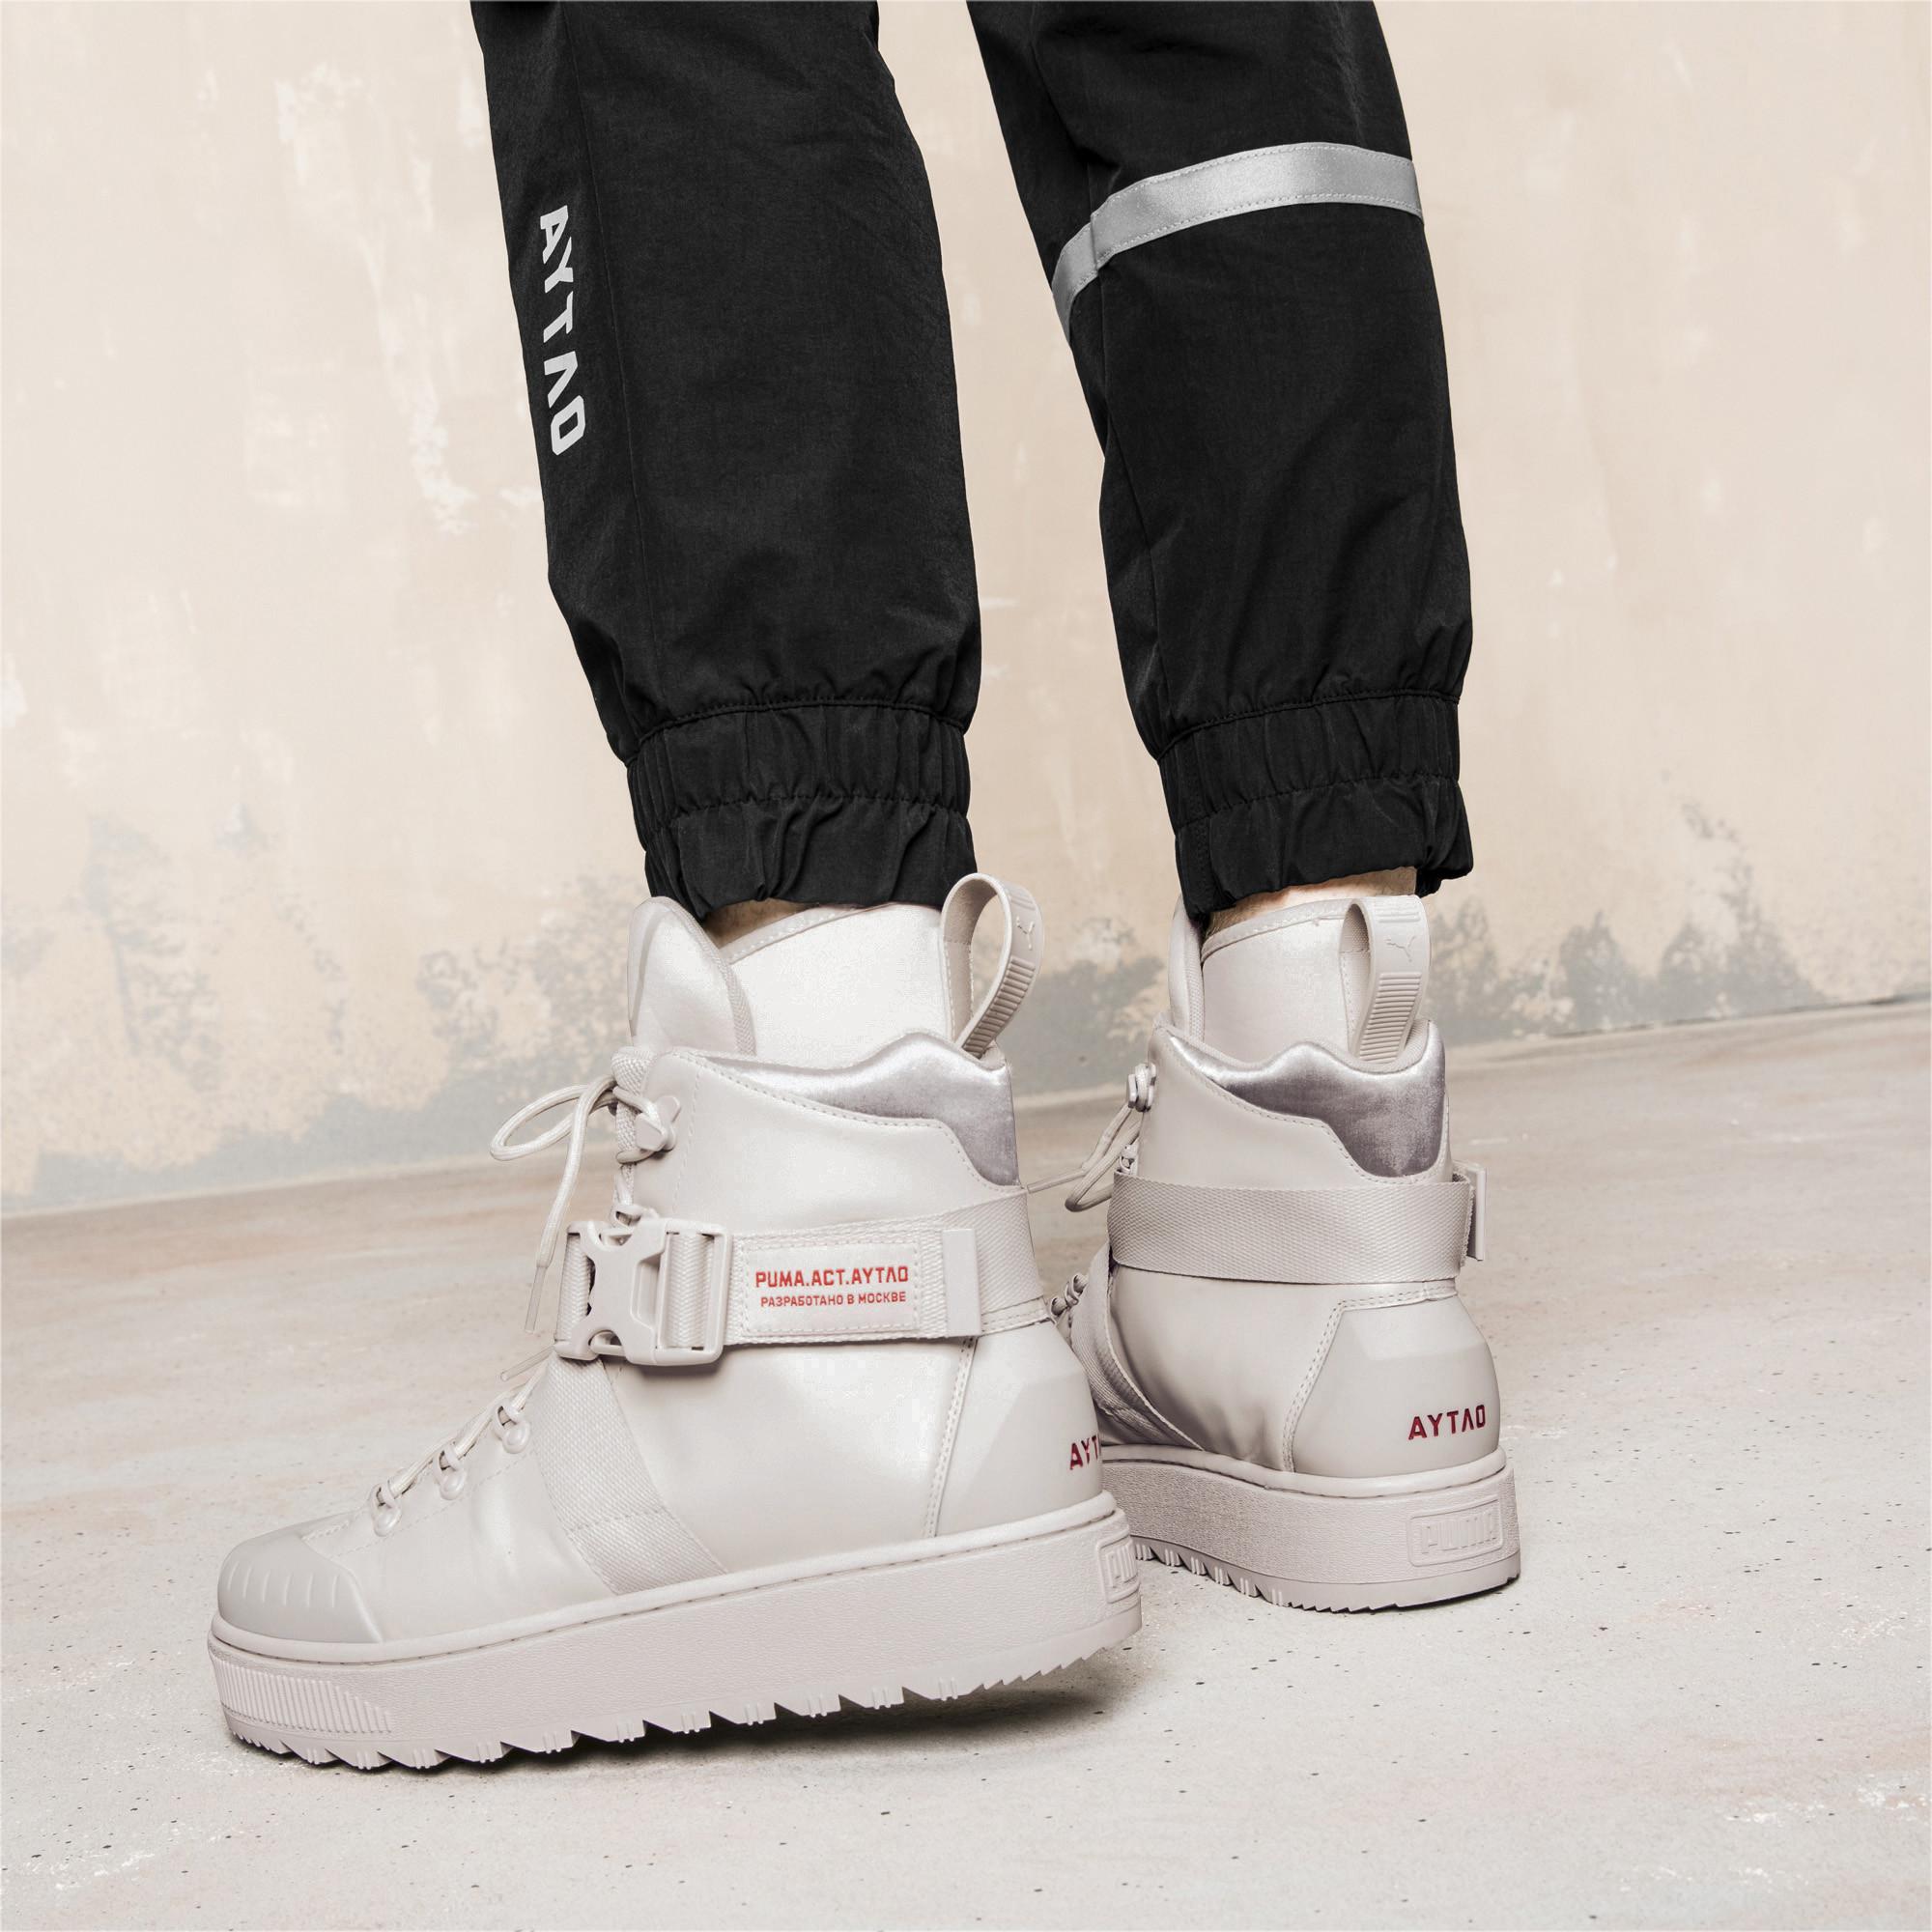 PUMA X Outlaw Moscow Ren Boots | Lyst